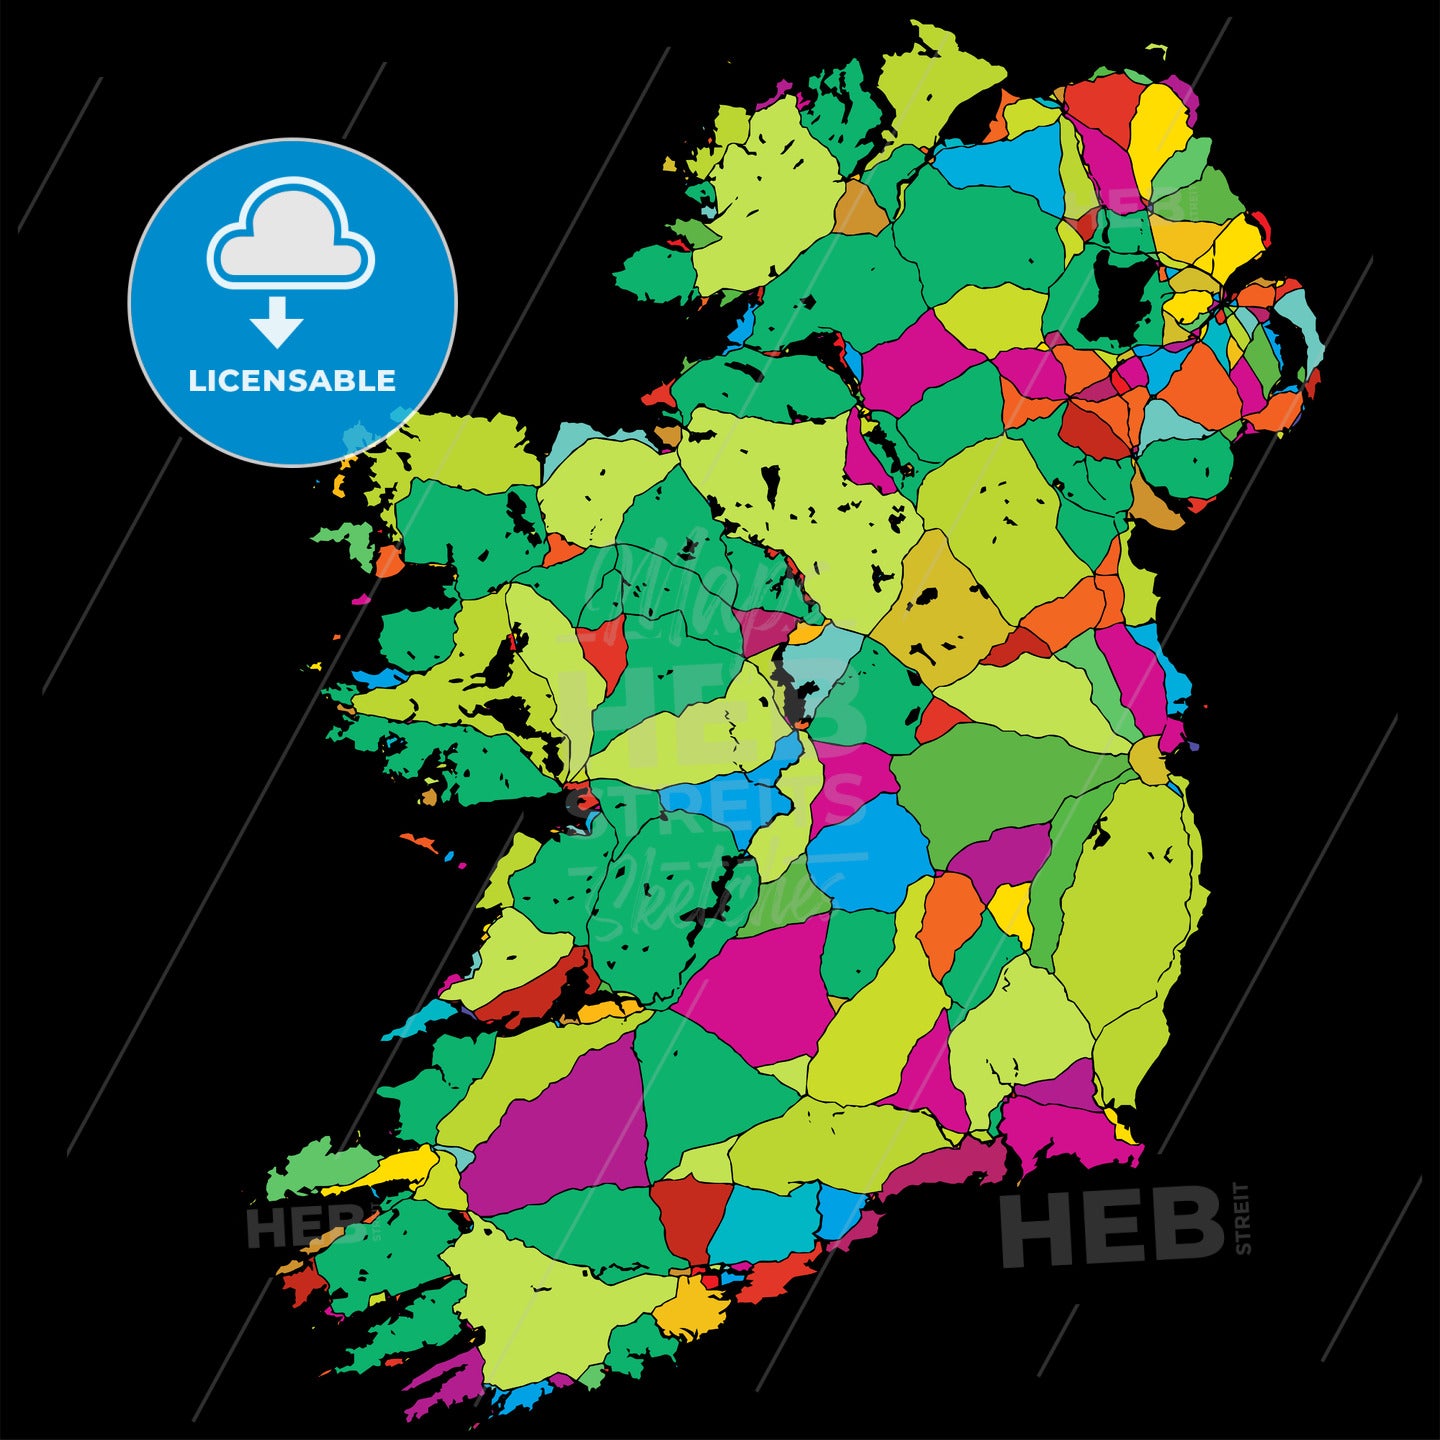 Ireland Colorful Vector Map on Black